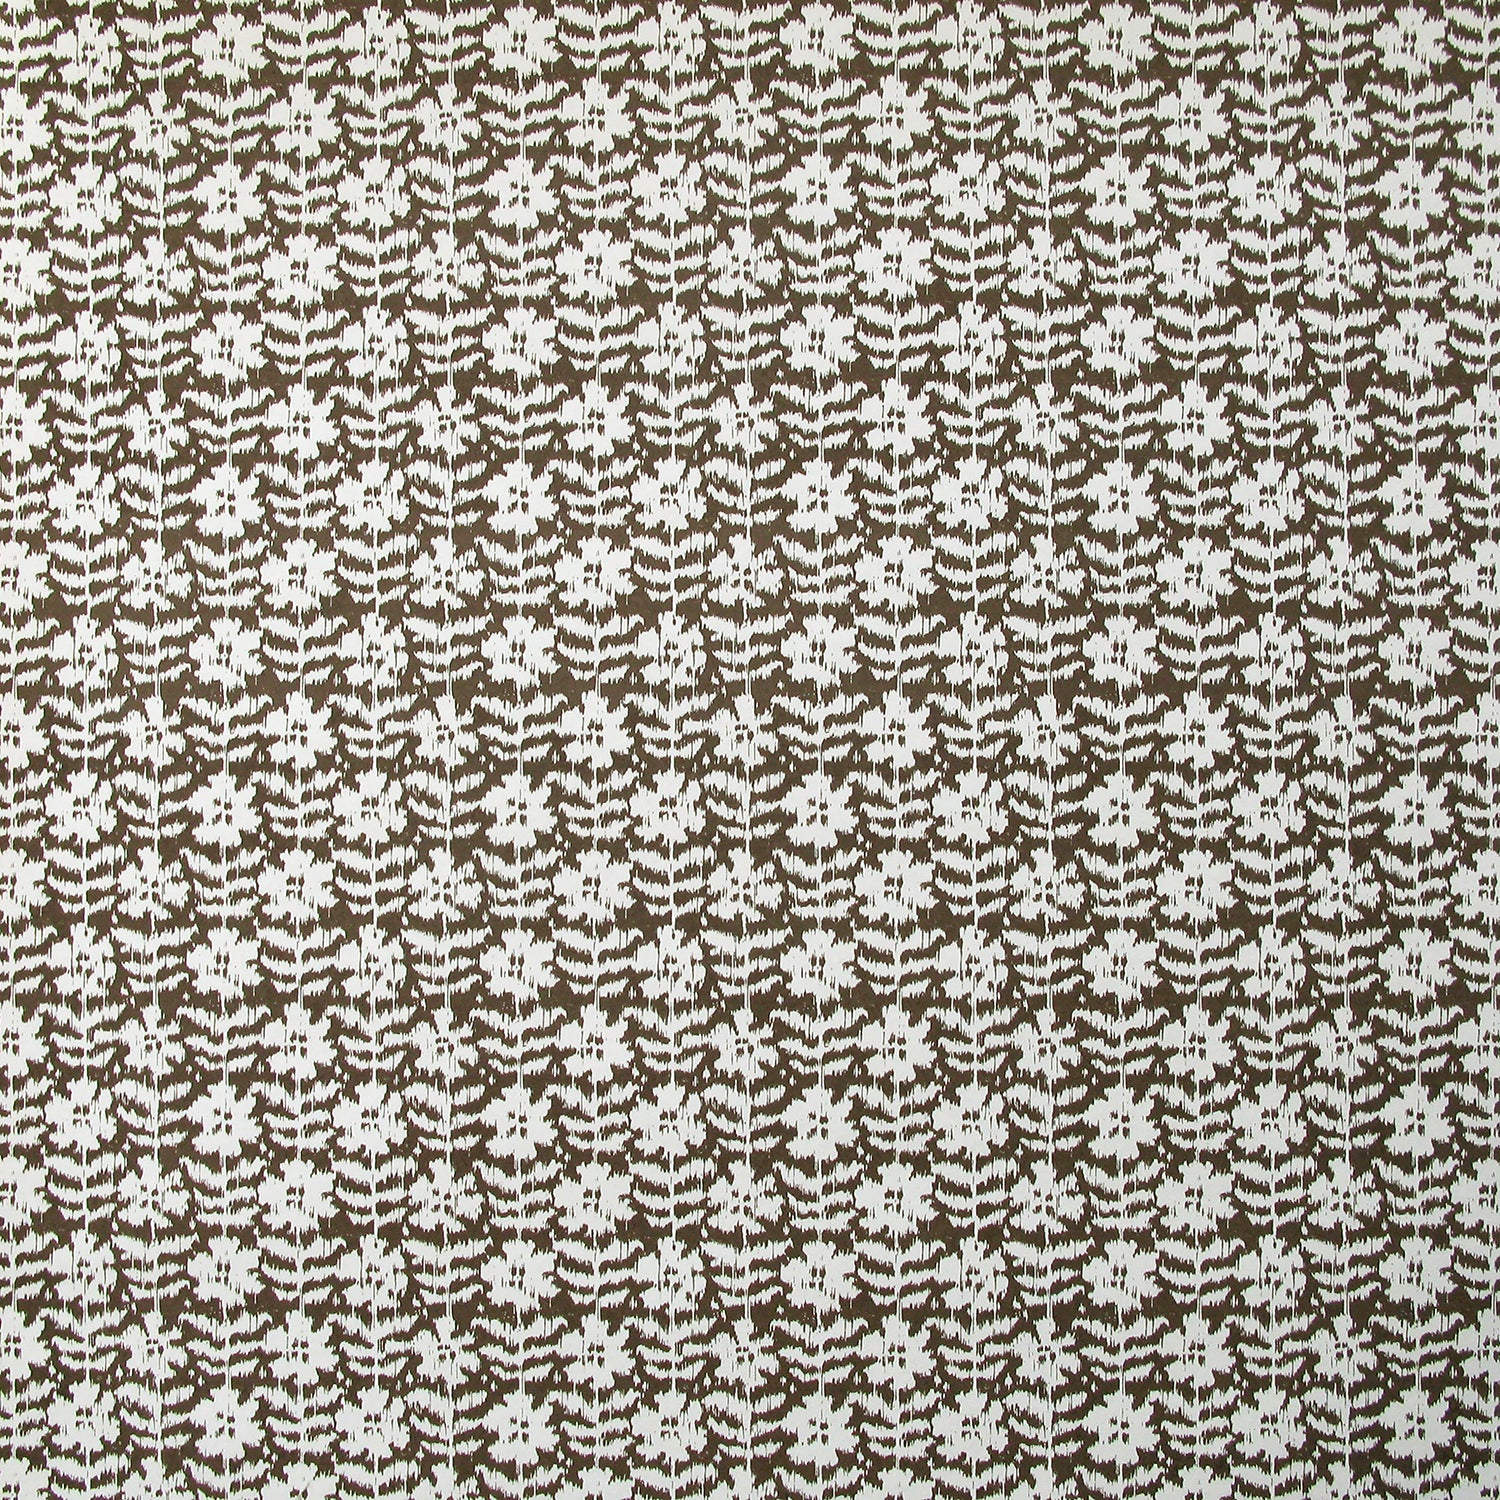 Detail of wallpaper in a floral grid print in white on a dark brown field.